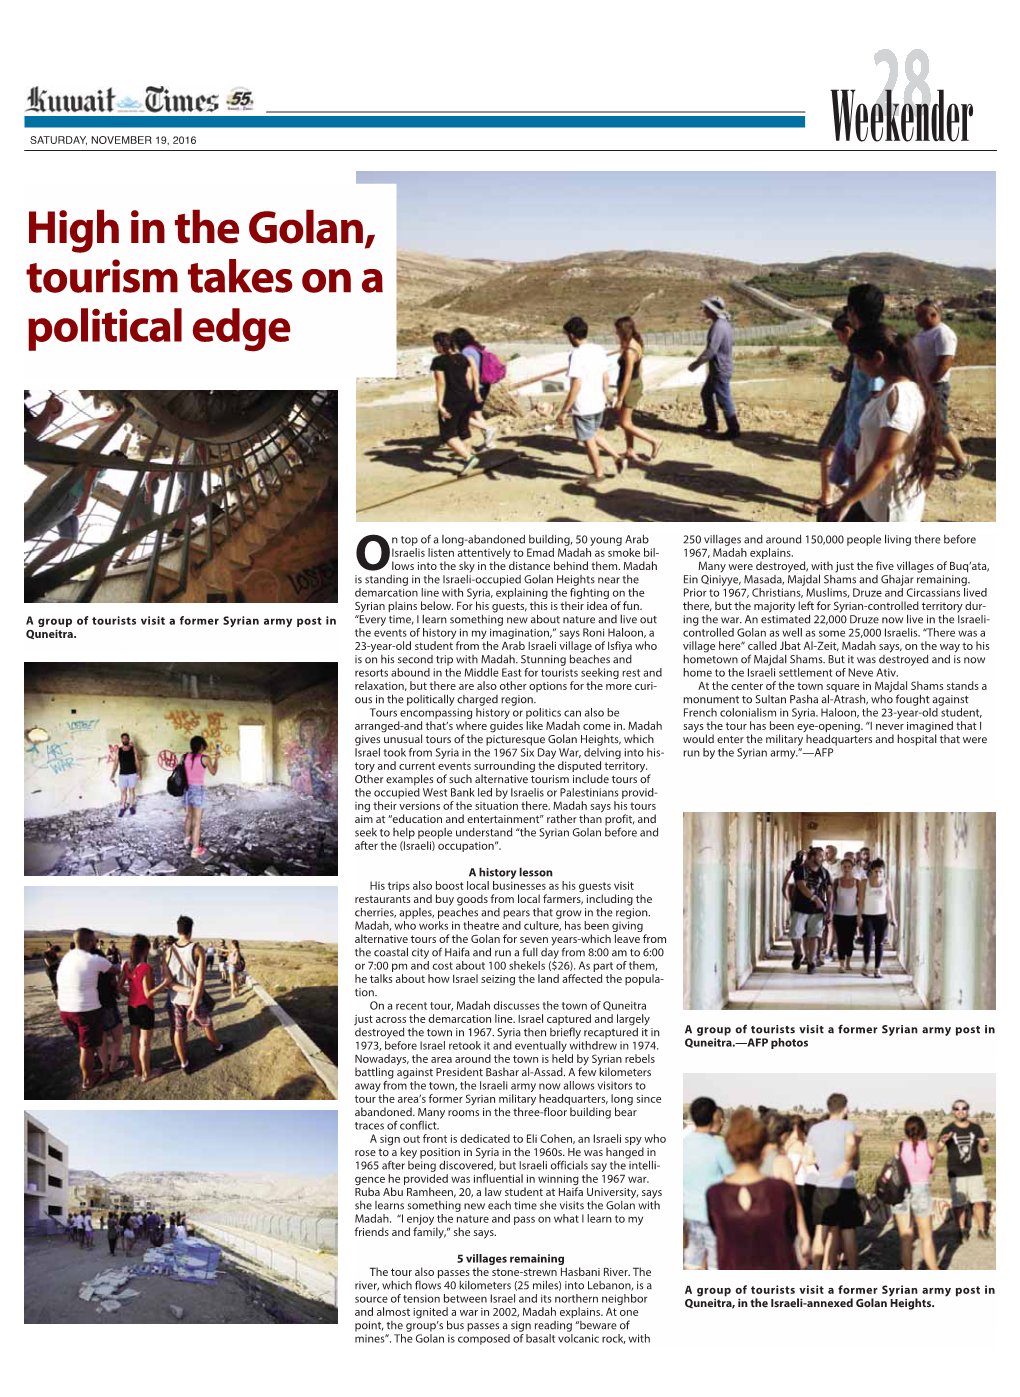 High in the Golan, Tourism Takes on a Political Edge